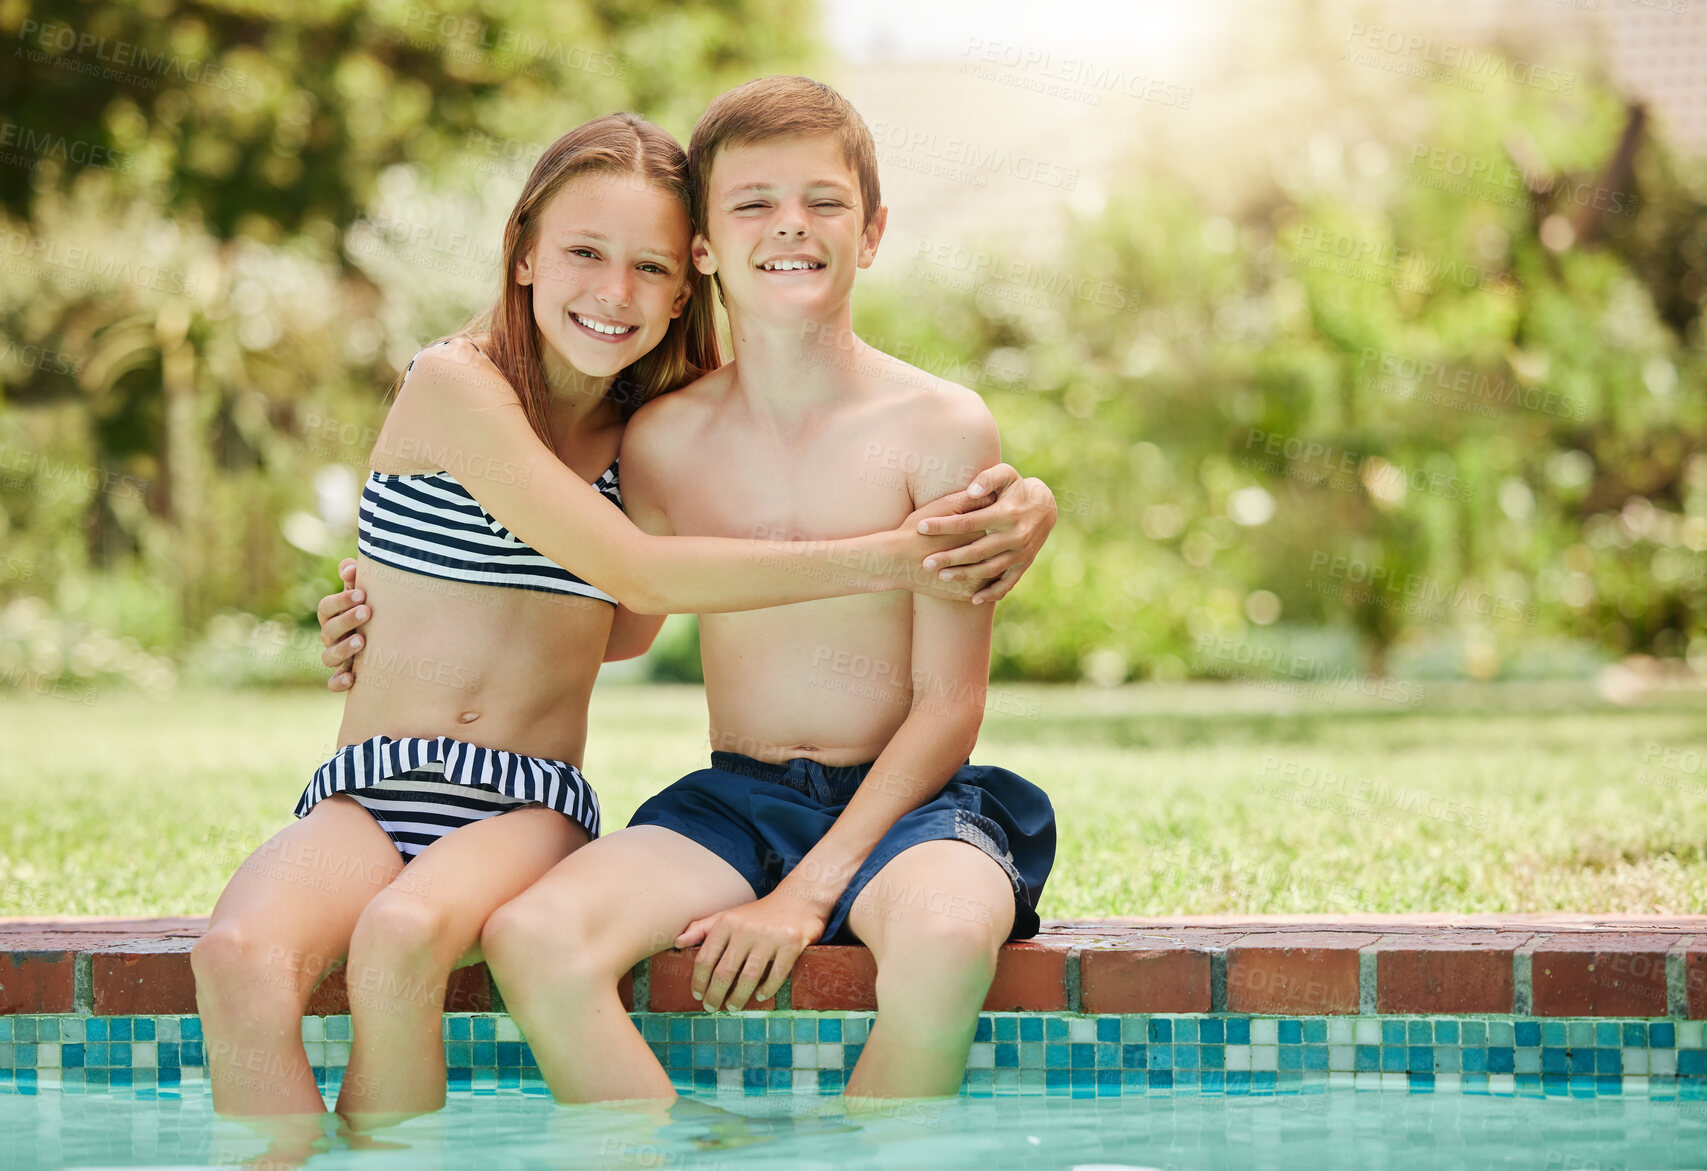 Buy stock photo Shot of a young boy and girl sitting with their feet in the pool